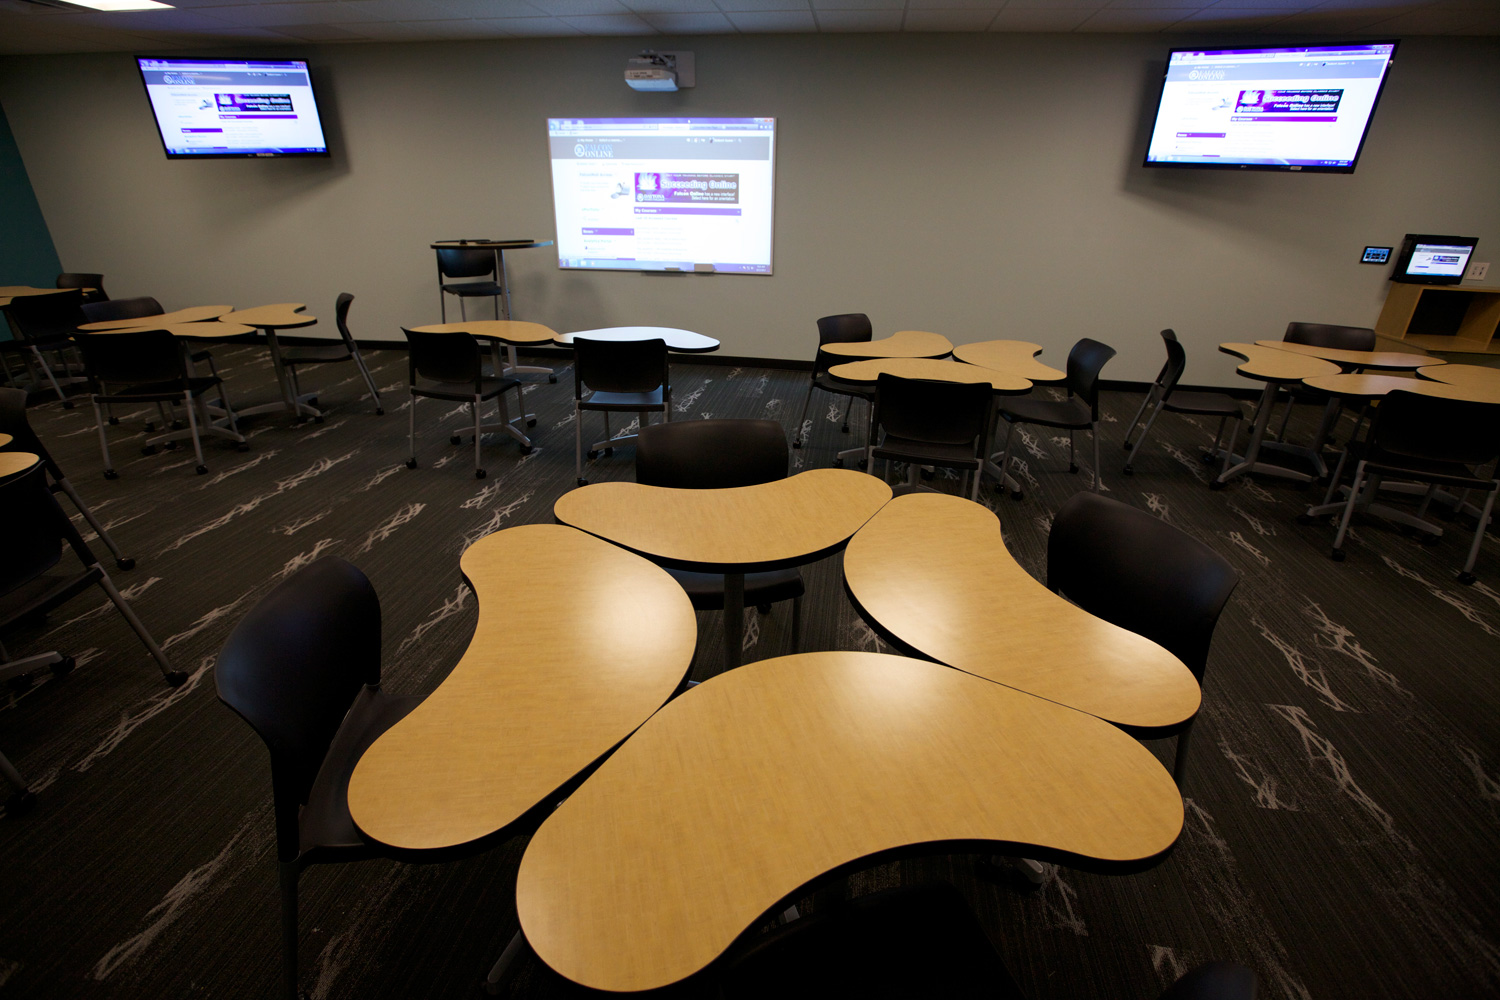 Classroom of the Future blends old-school teaching with high-tech learning